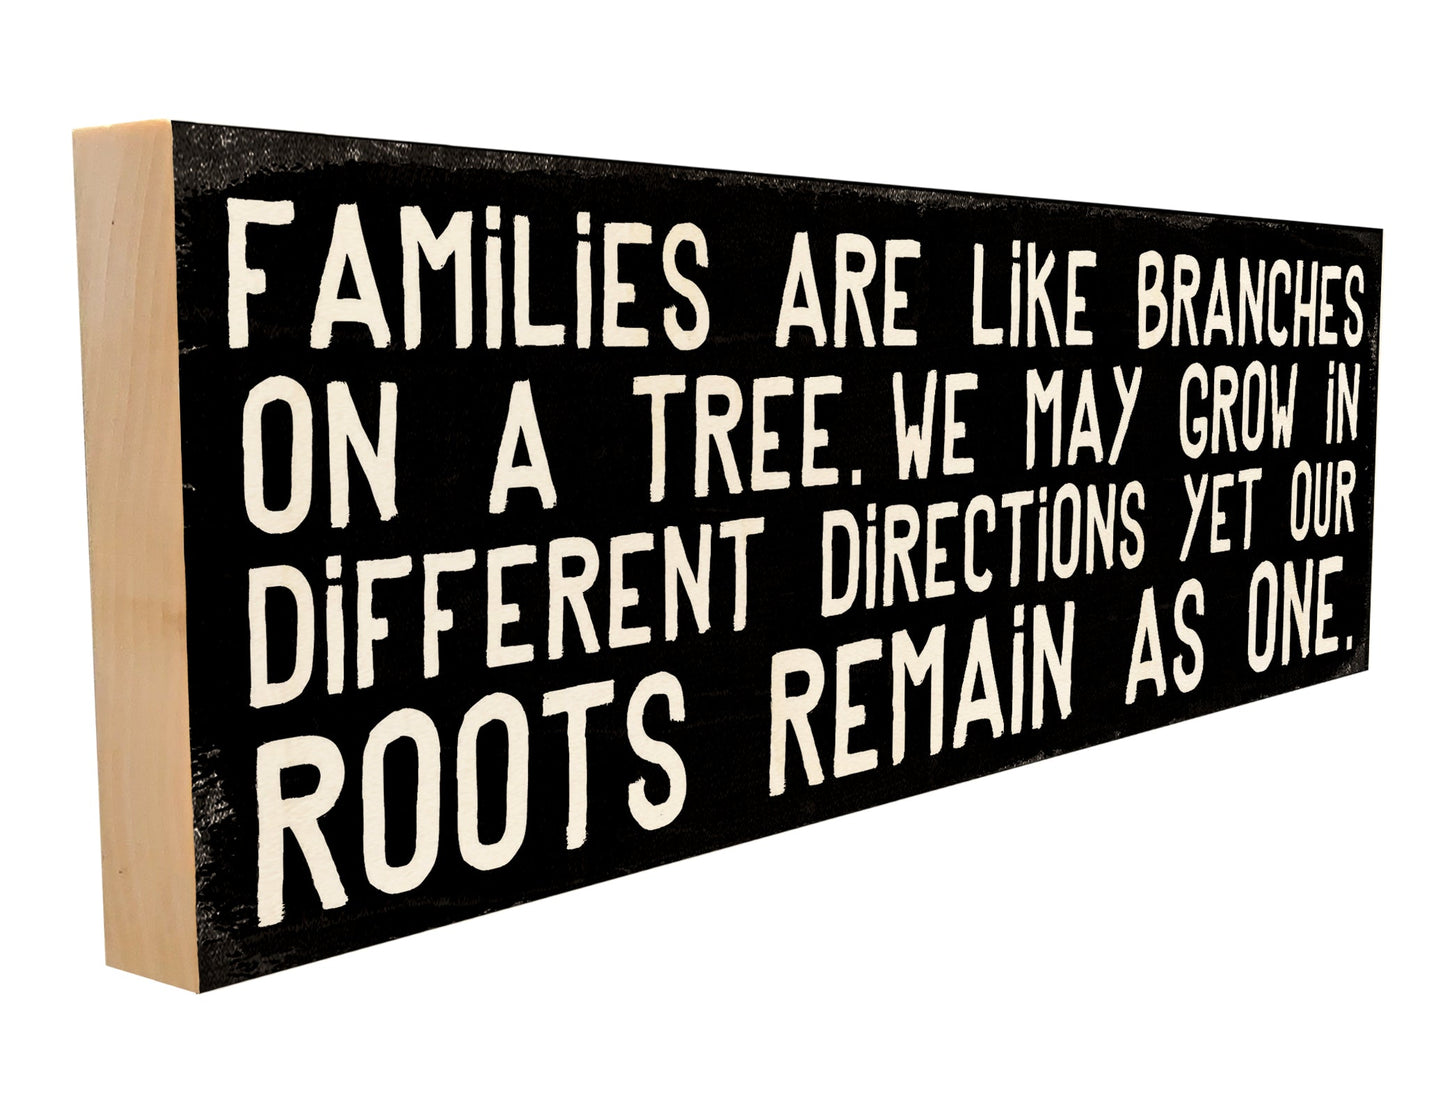 Families are Like Branches on a Tree.